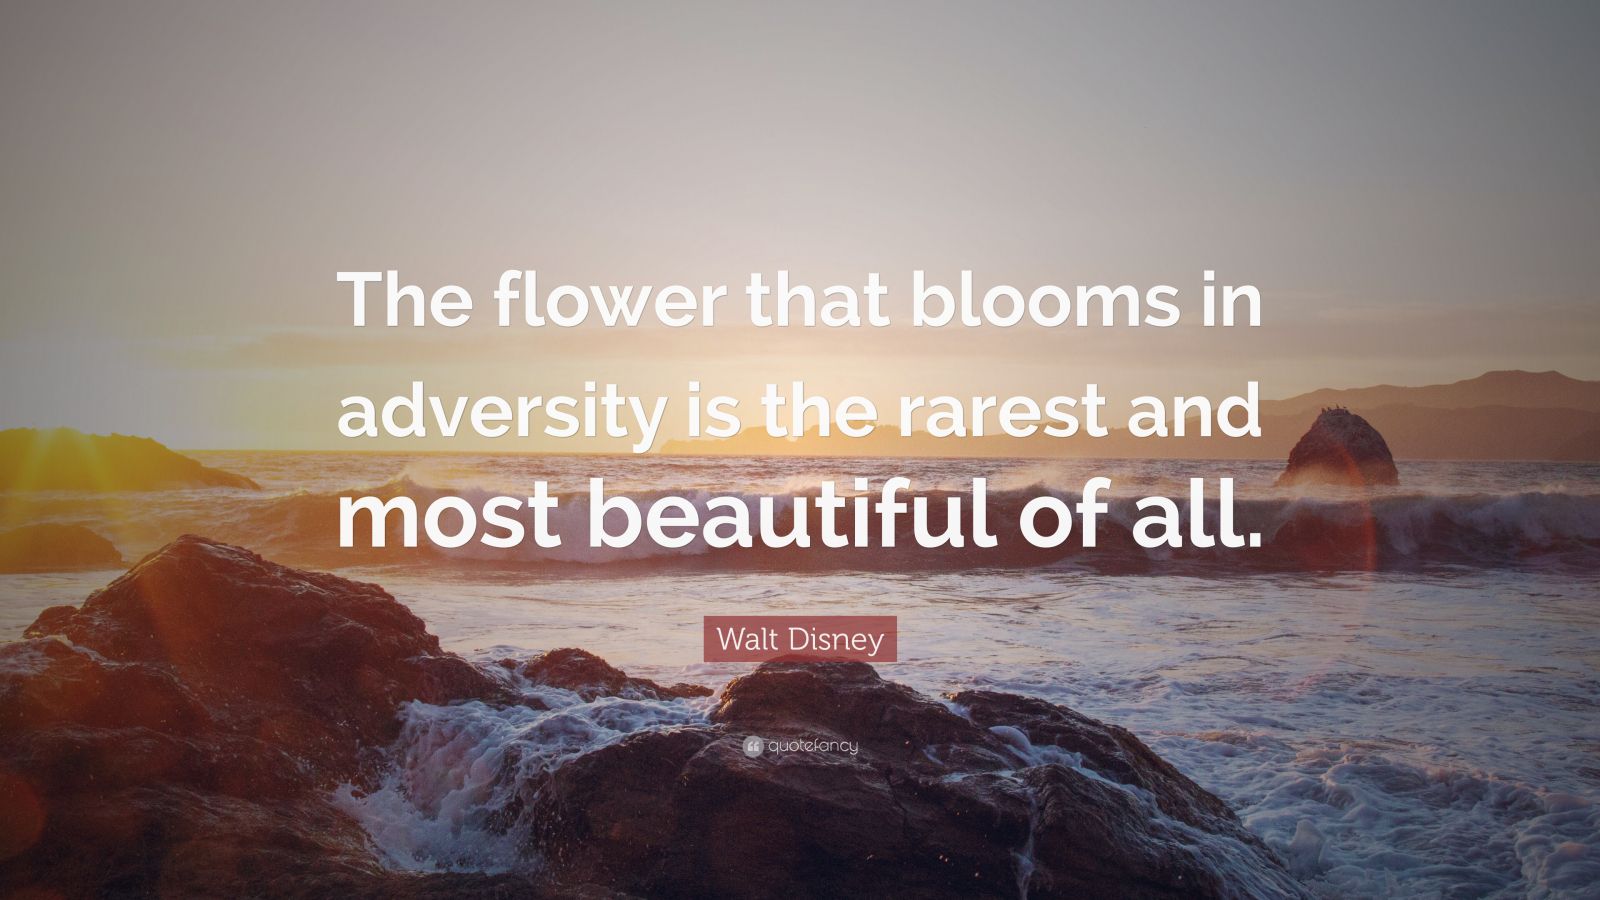 Walt Disney Quote: “The flower that blooms in adversity is the rarest ...